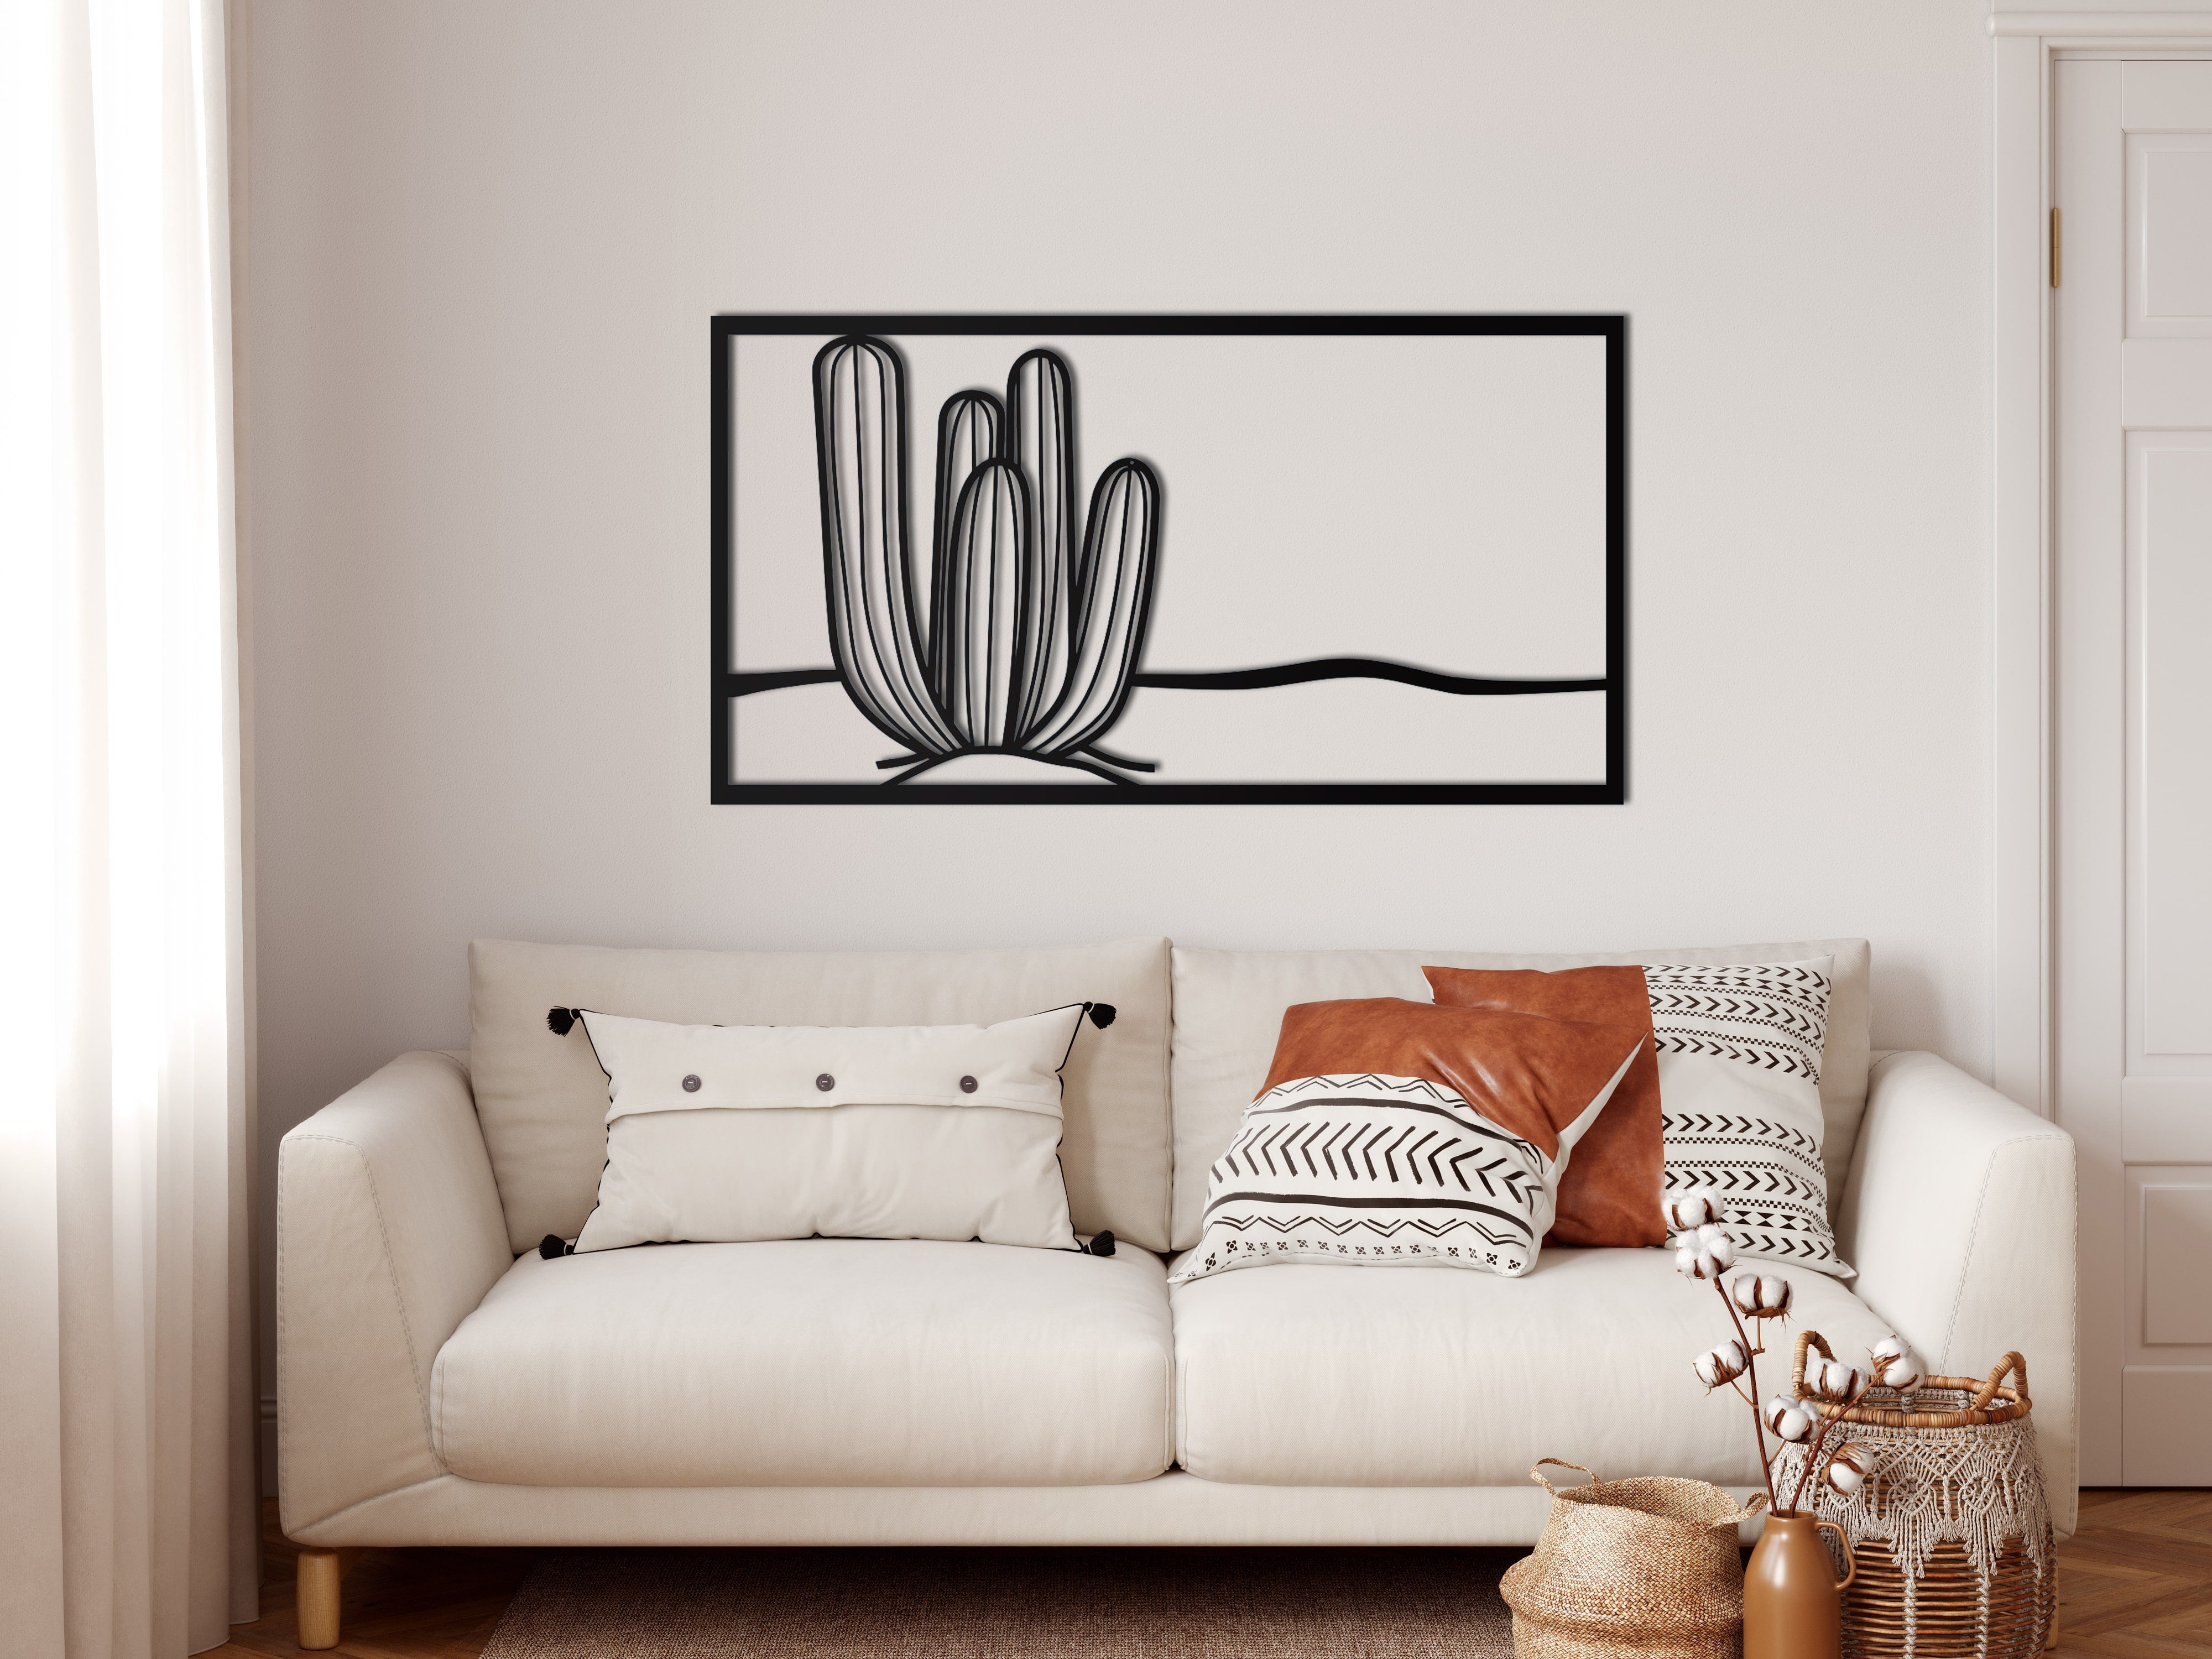 Cactus in A frame Metal Wall Decor